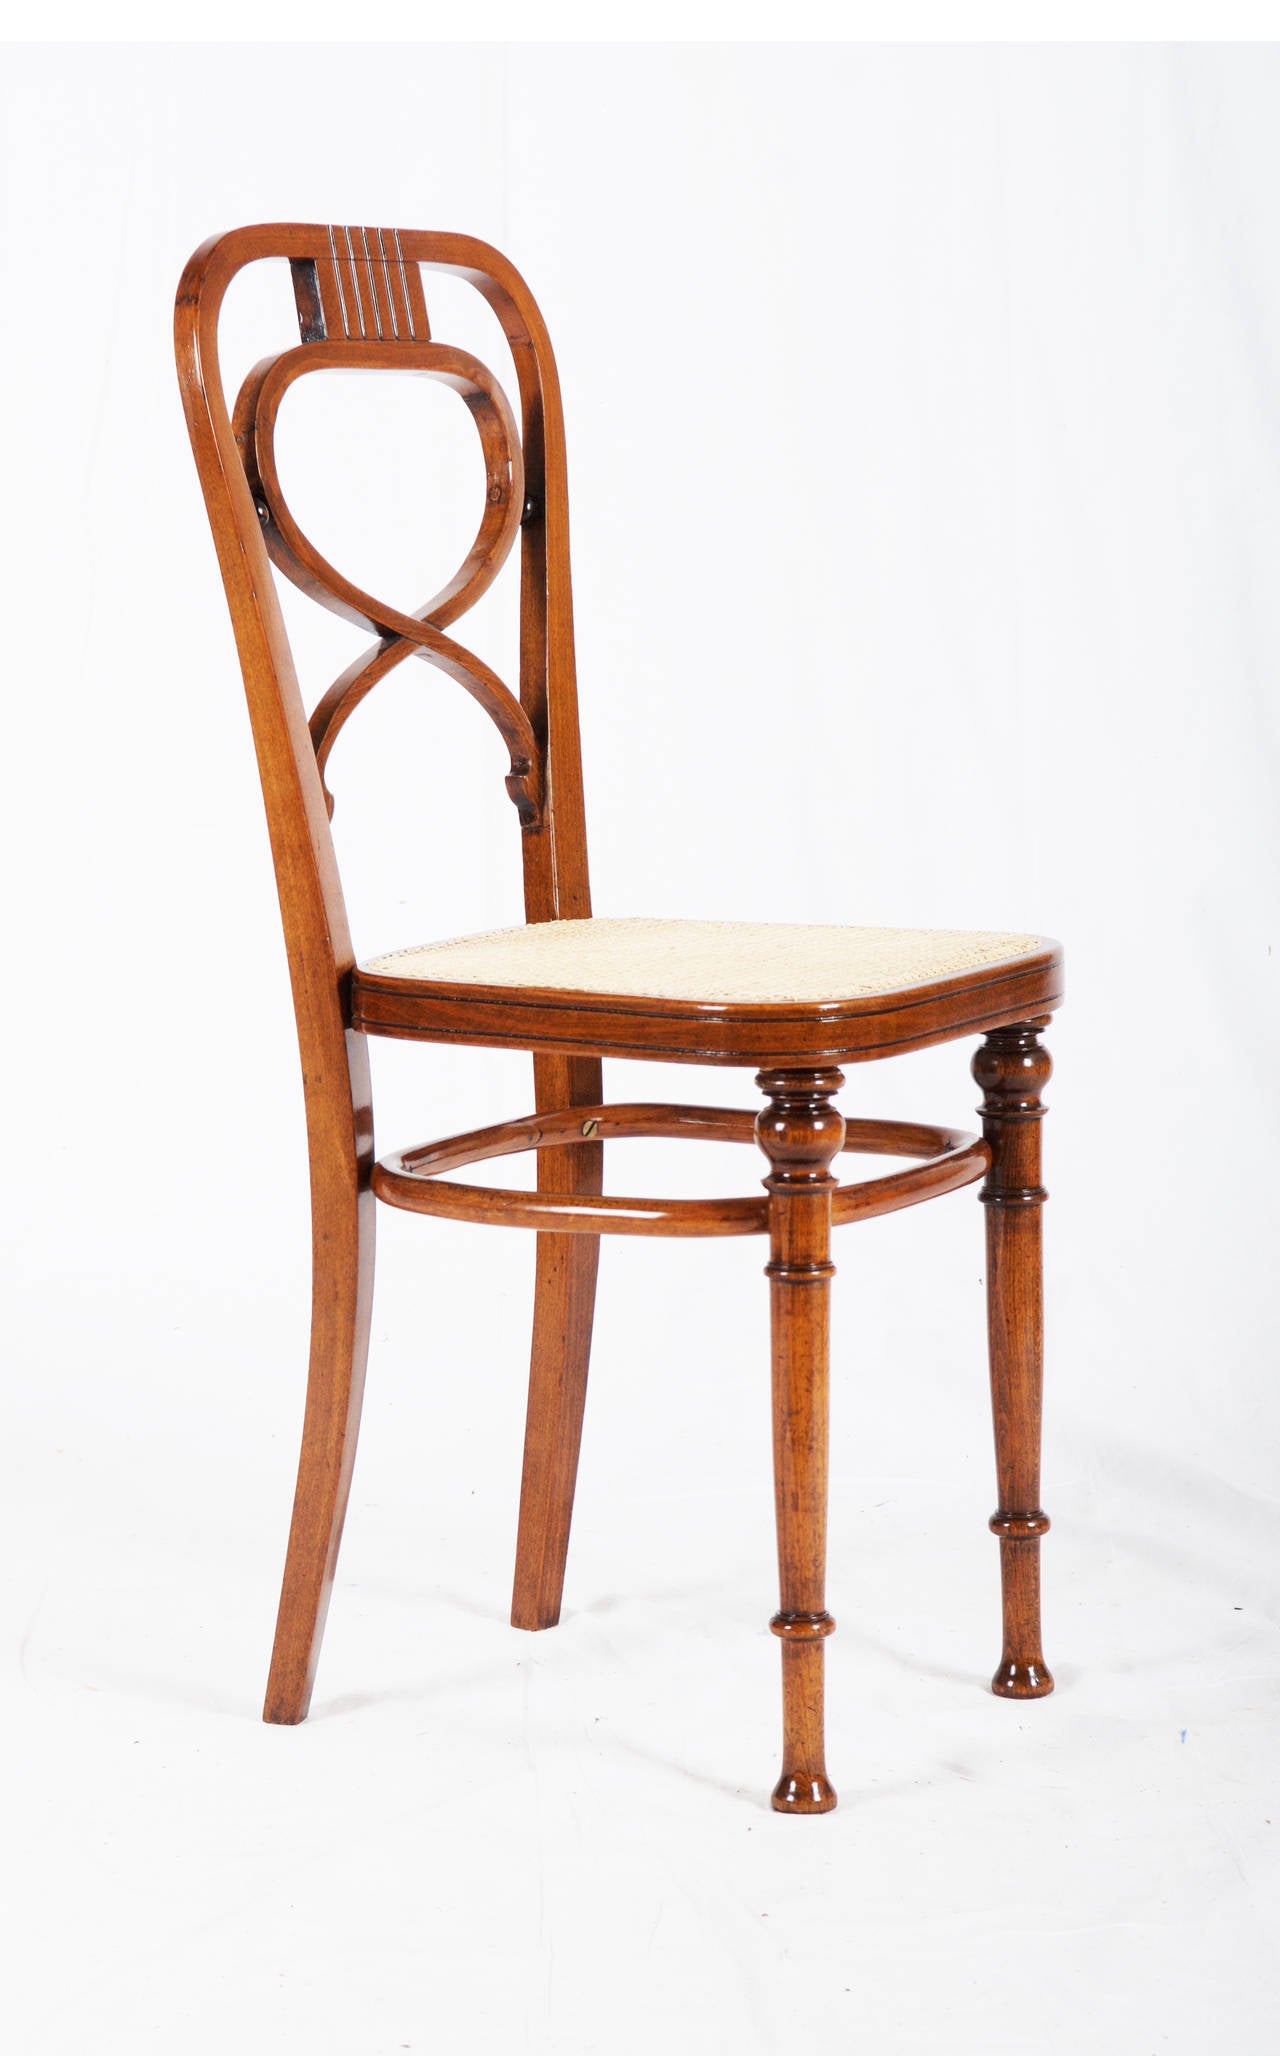 Rare Vienna Secession Thonet chair.
Beech bentwood walnut stained shellack finish with new canning.